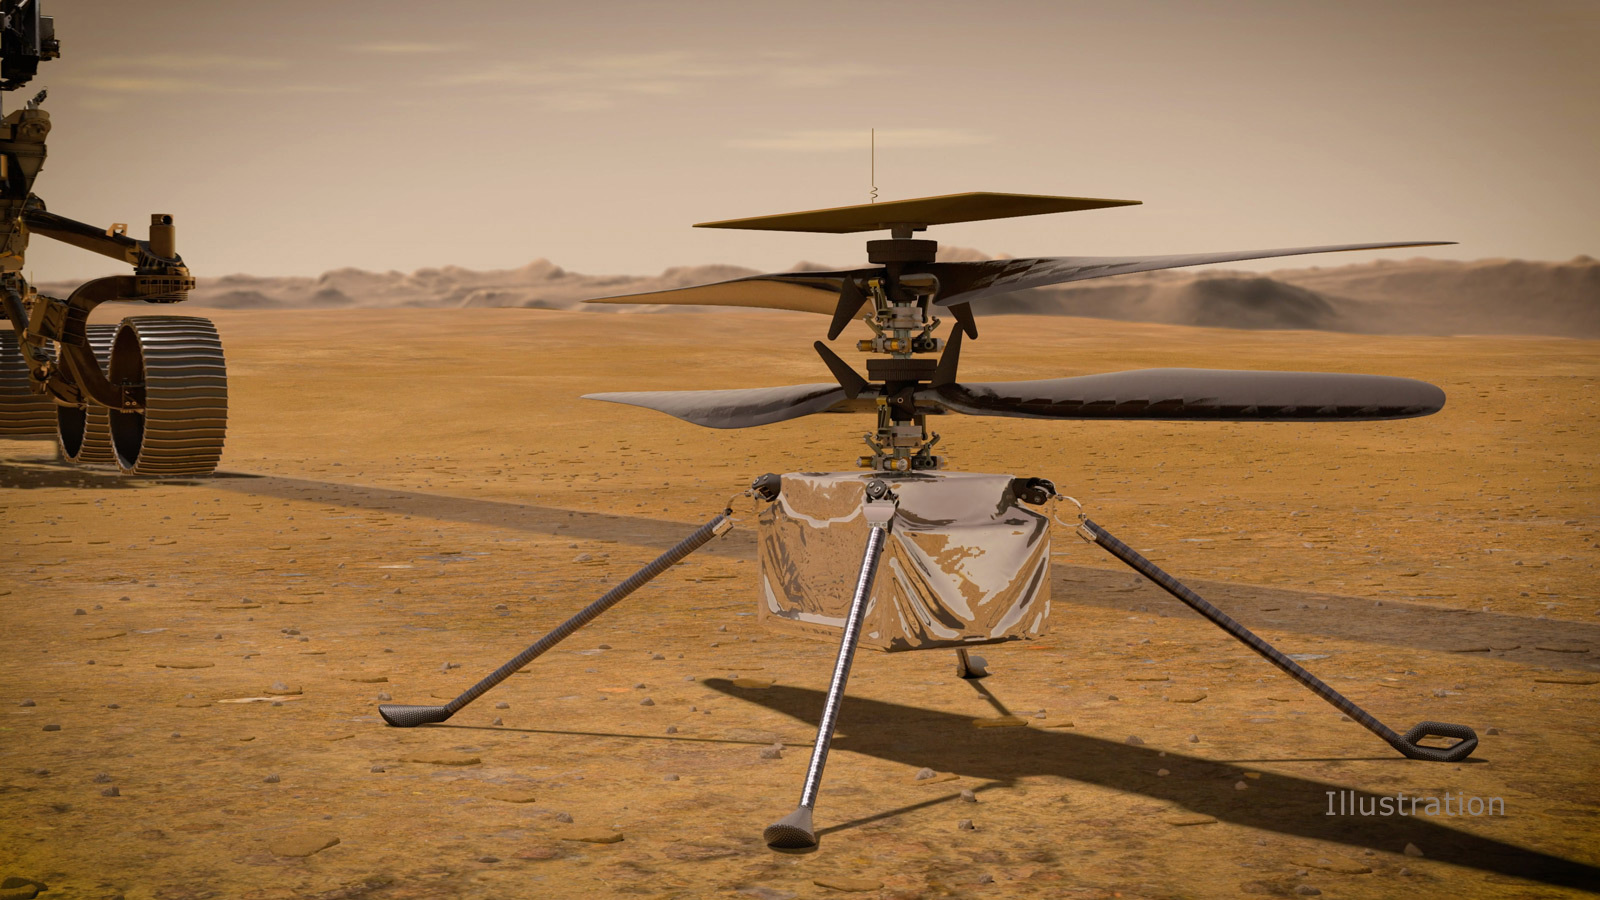 NASA to Host Briefing to Preview First Mars Helicopter Flights